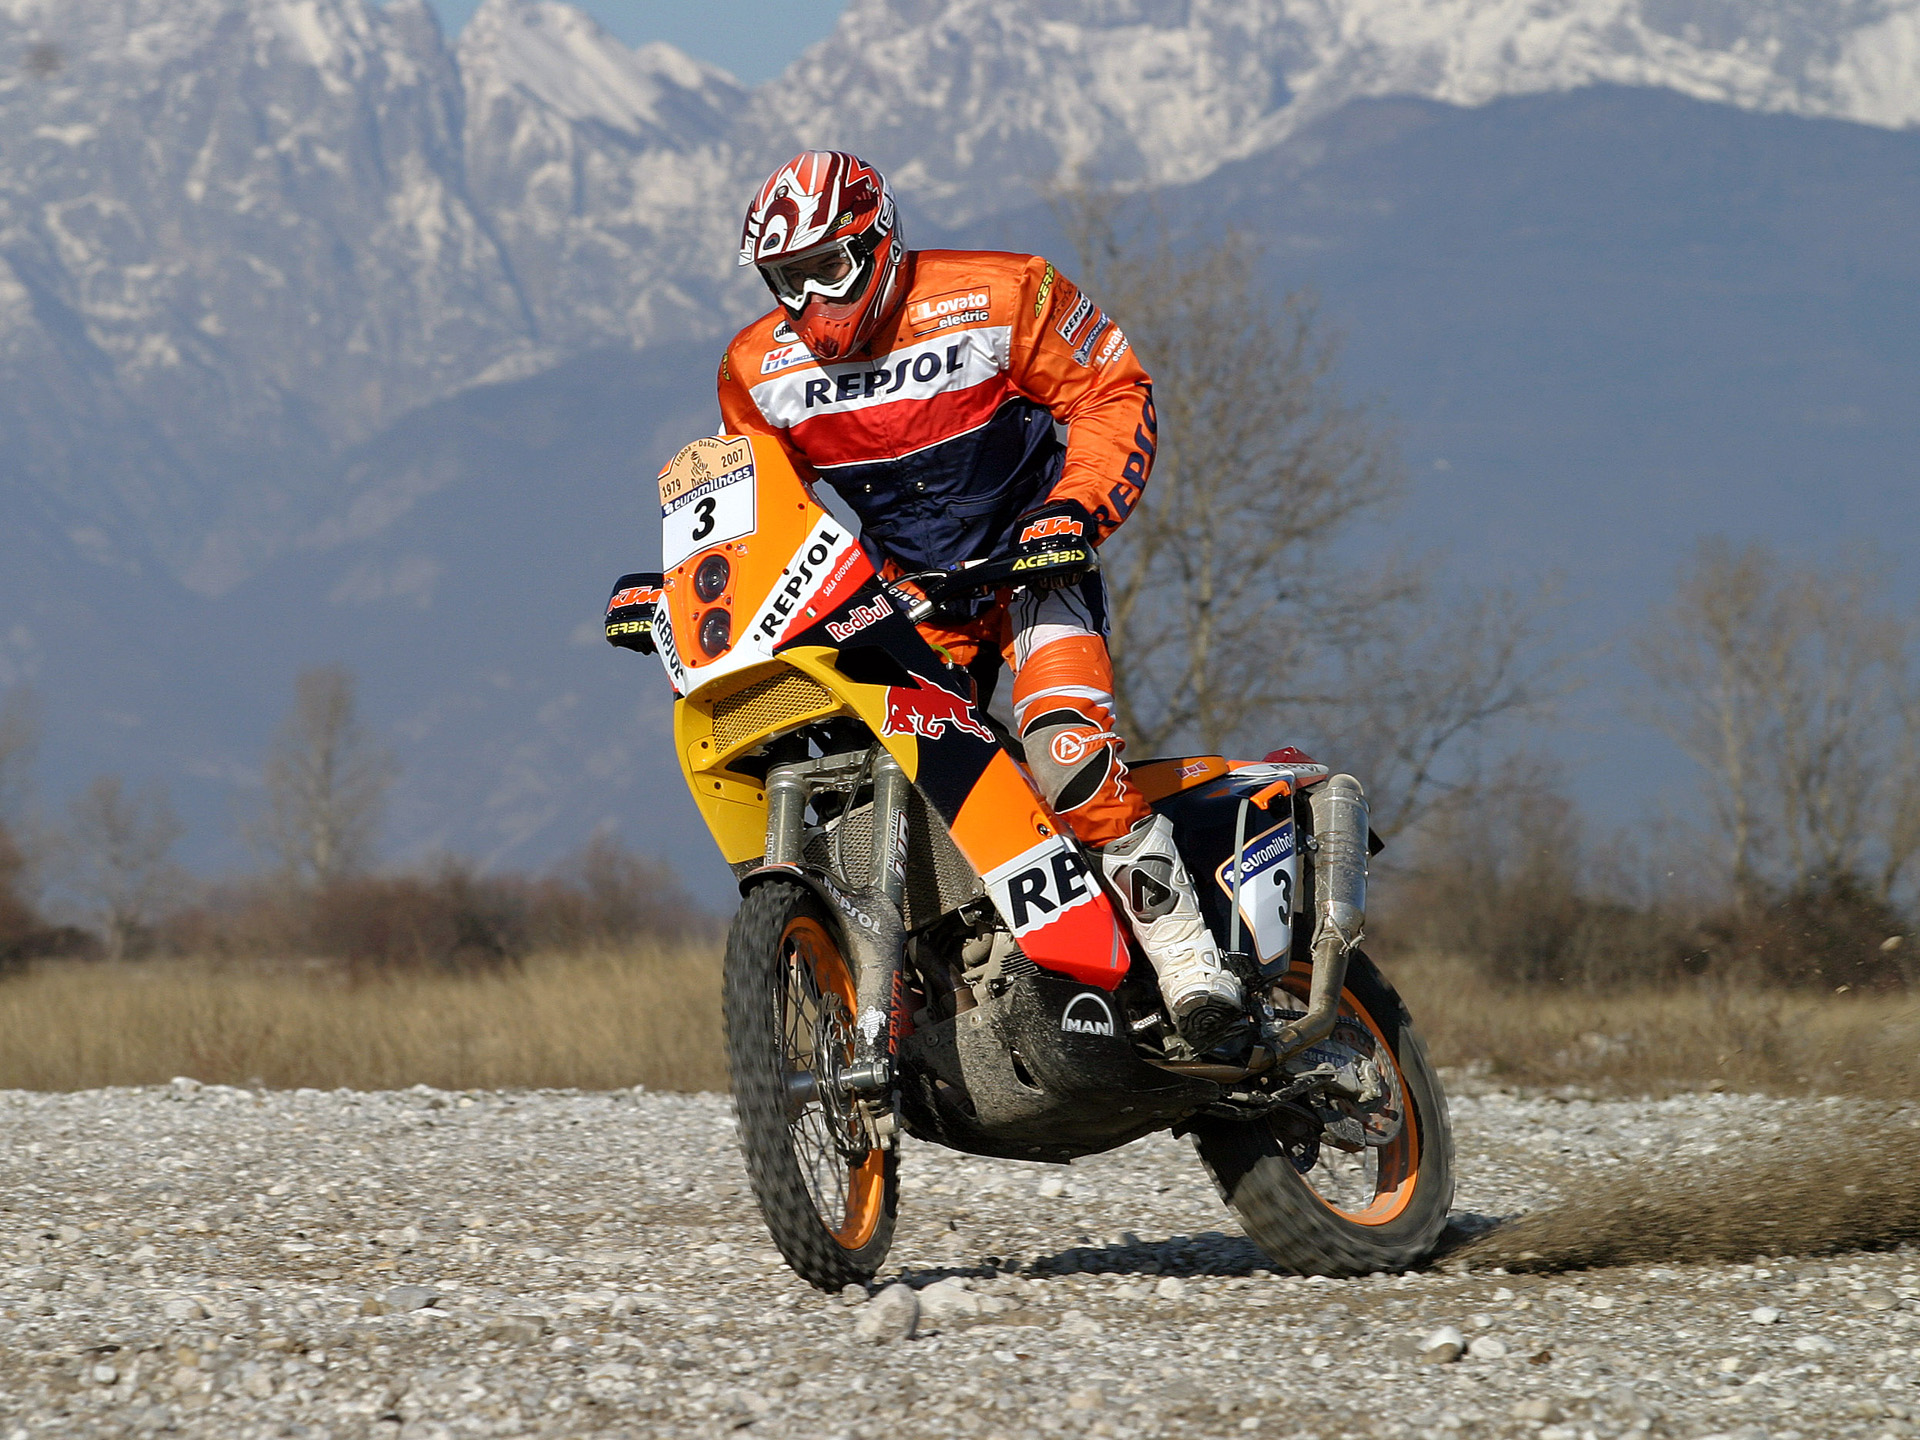 Download KTM 690 Rally photo #60650) You can use this pic as wallpaper (pos...